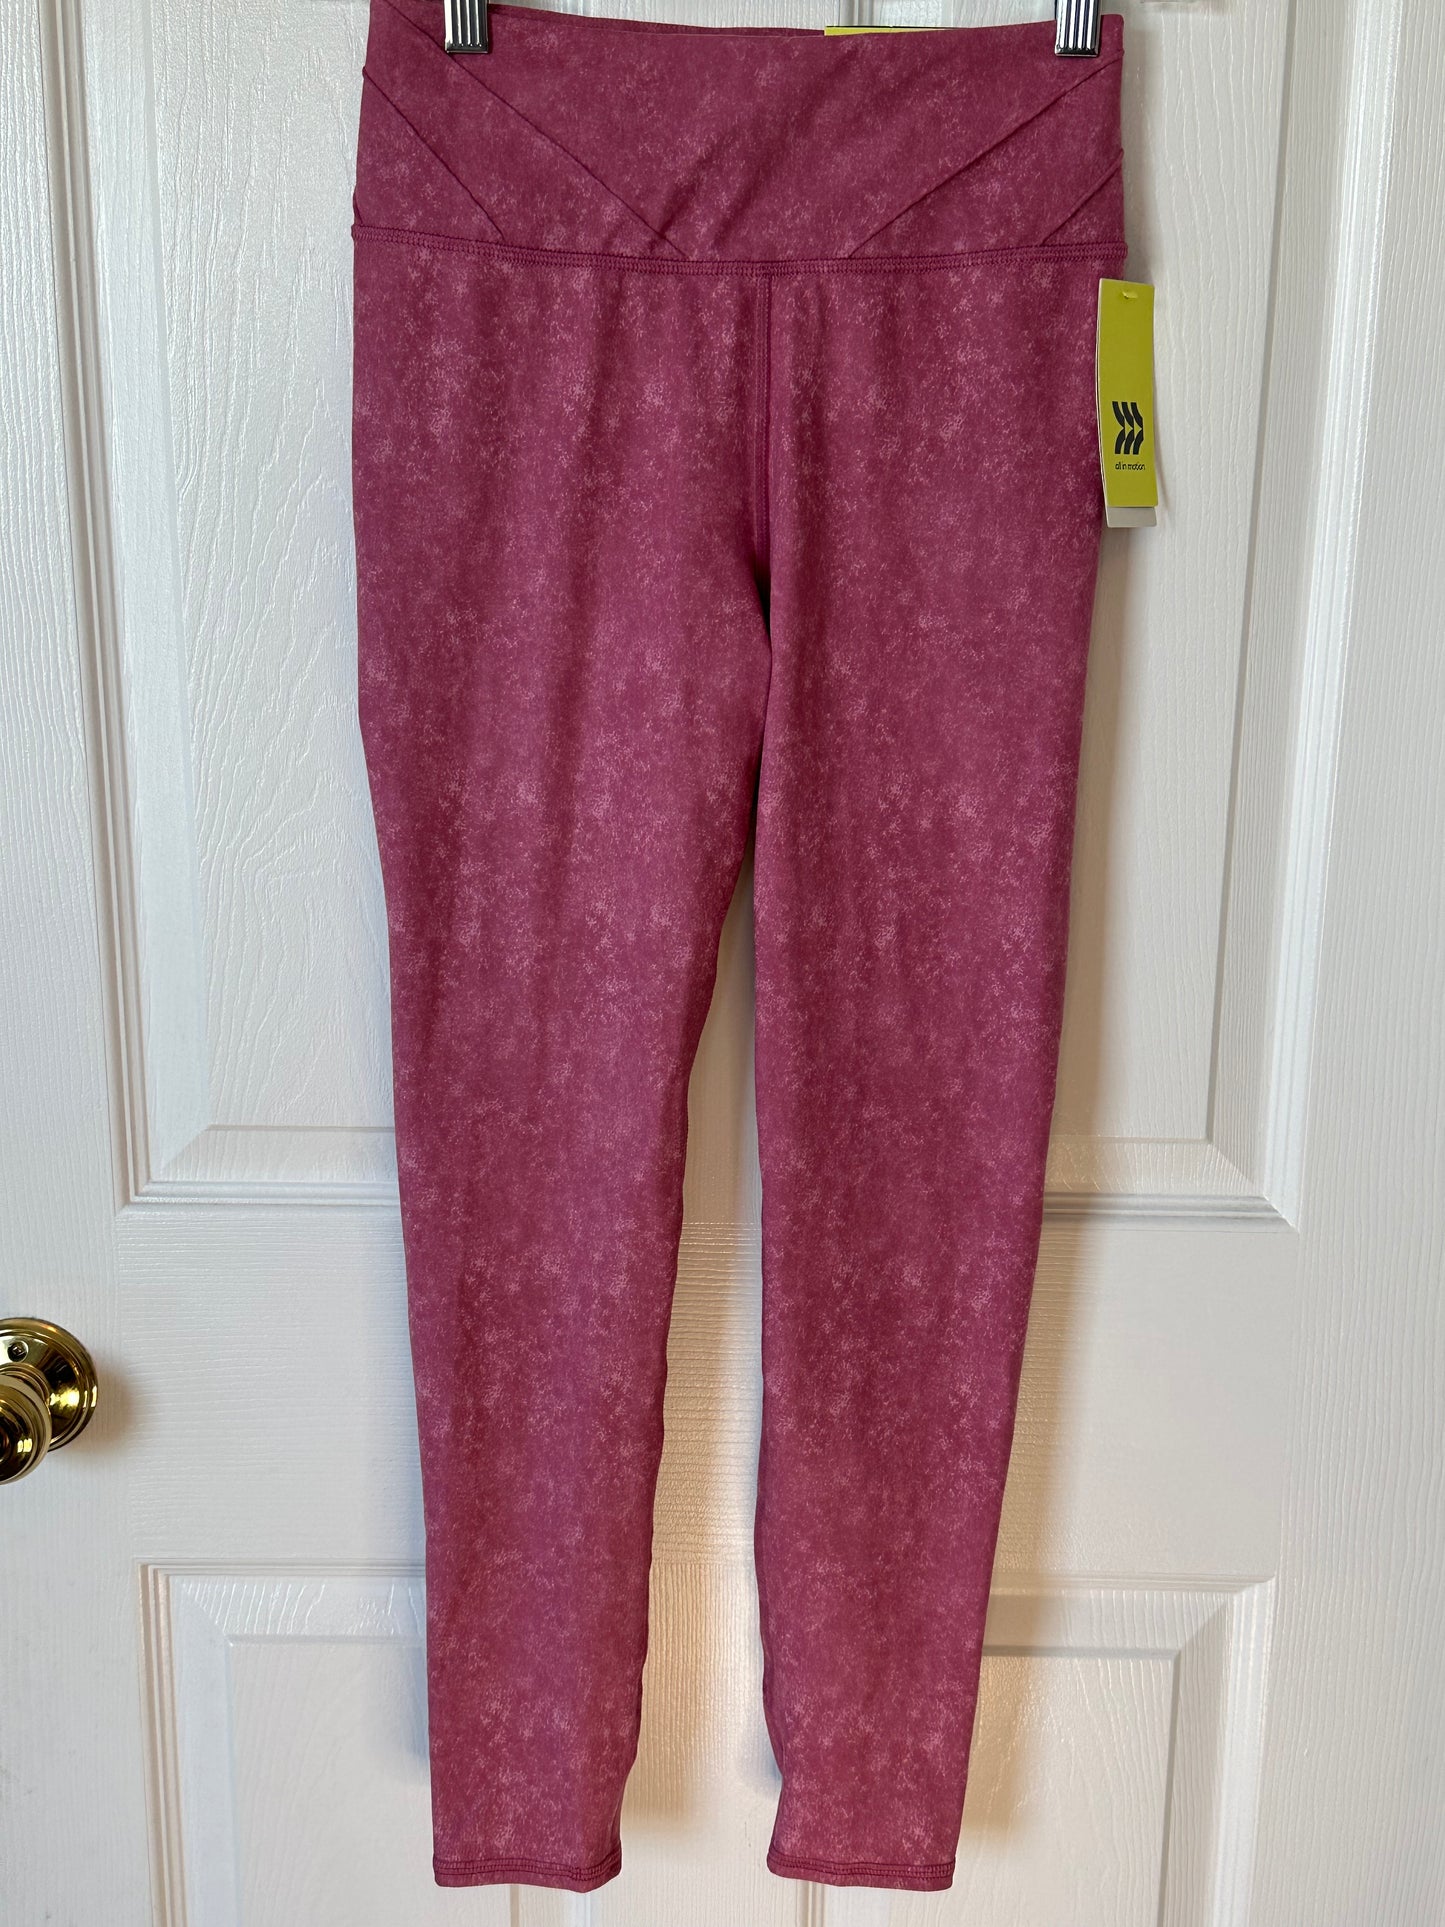 New NWT Girls All in Motion High Rise Leggings Sz 10 / 12 Mauve Pink